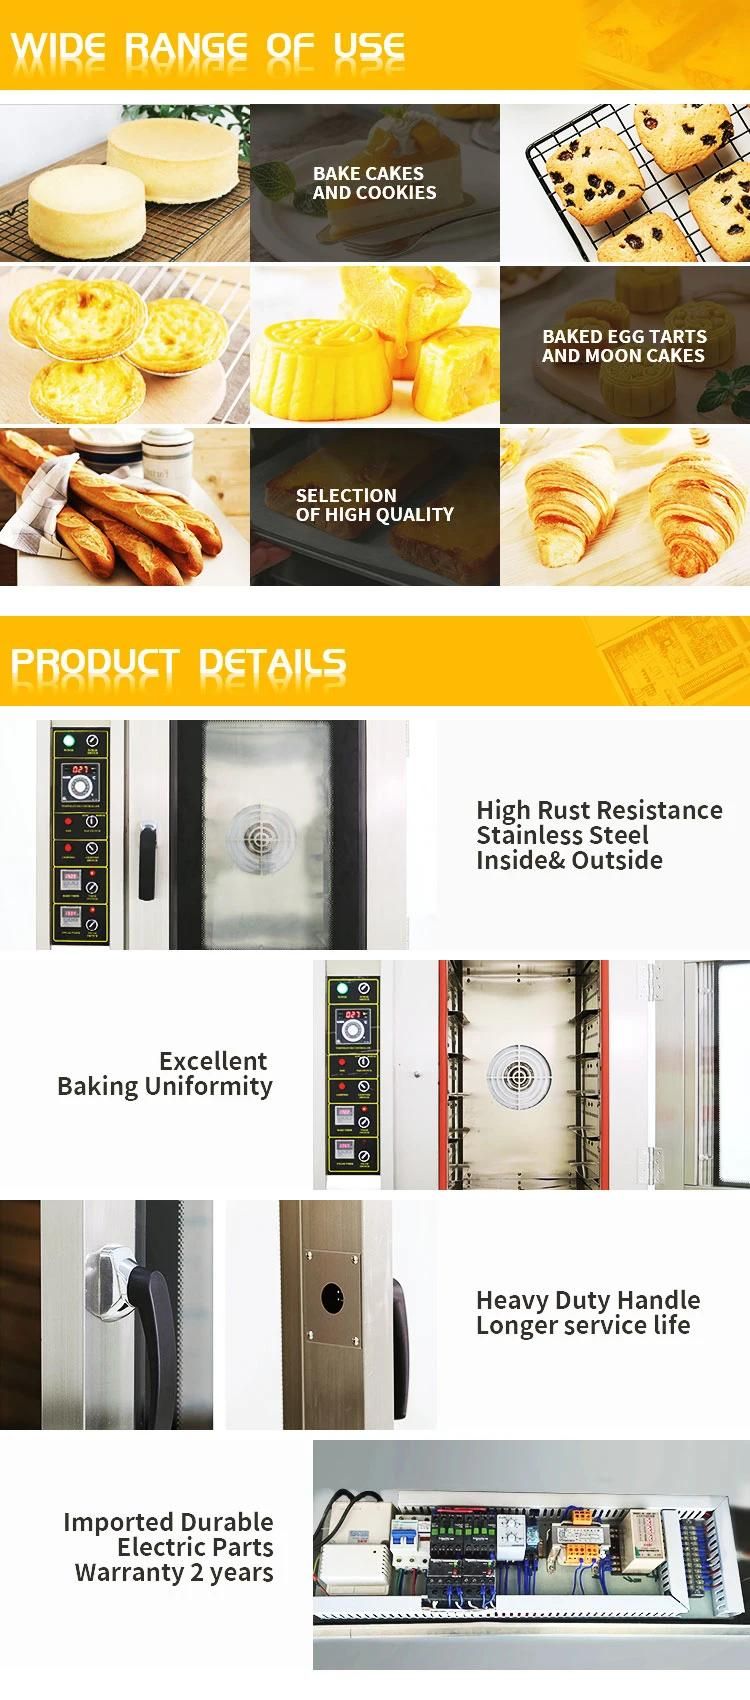 High Quality 5 Trays Electric Convection Oven/Bakery Machine